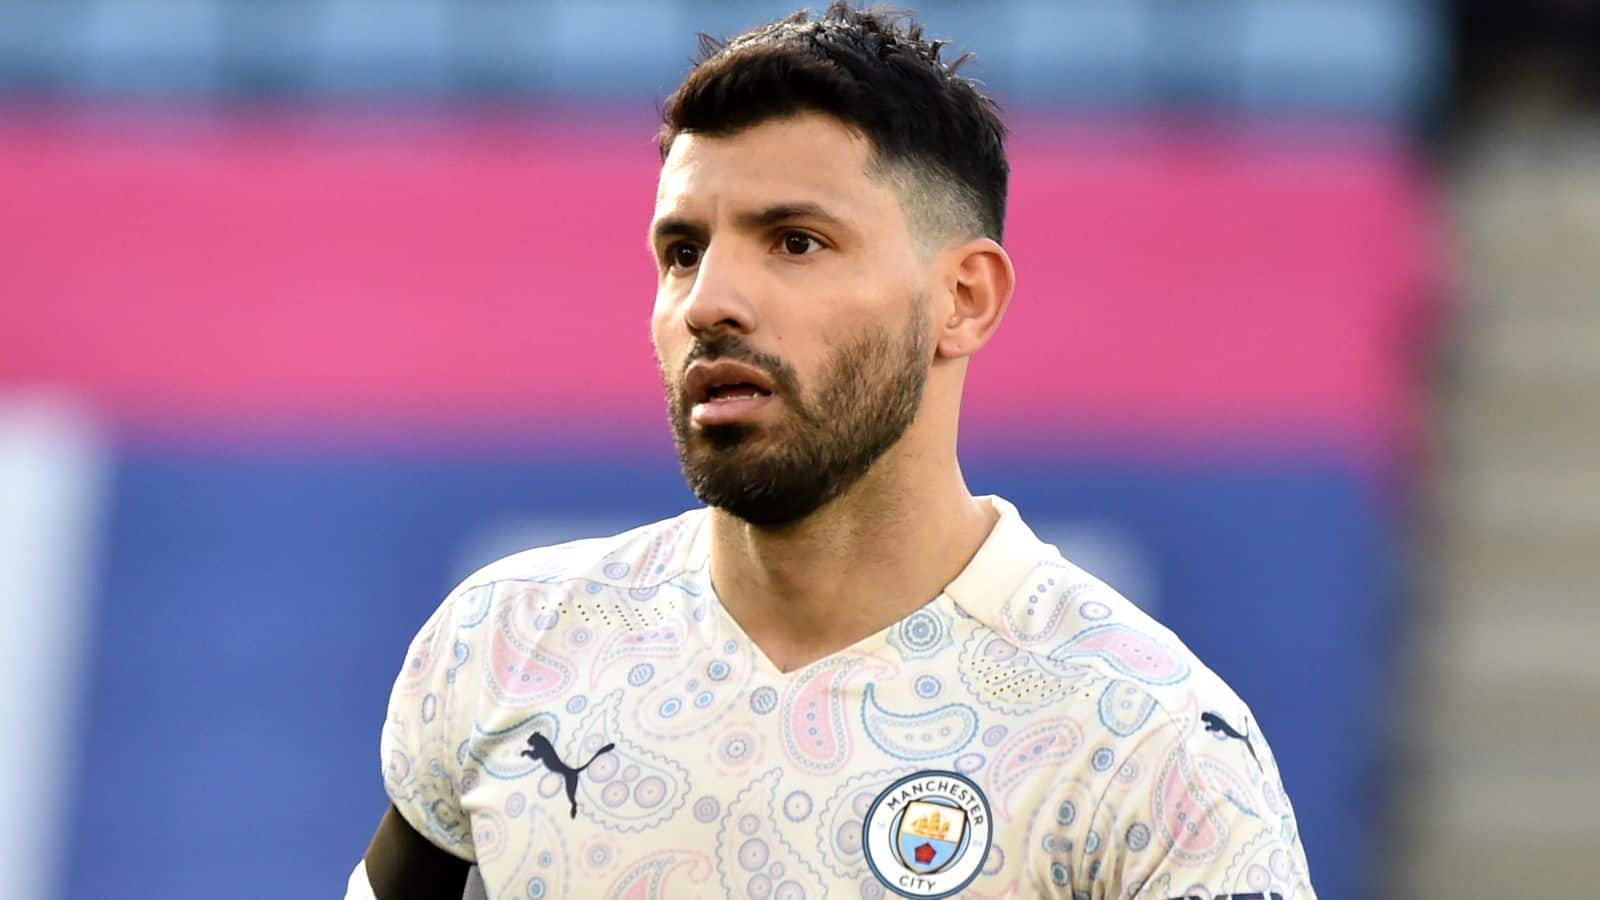 Barcelona snatches Aguero from Man City